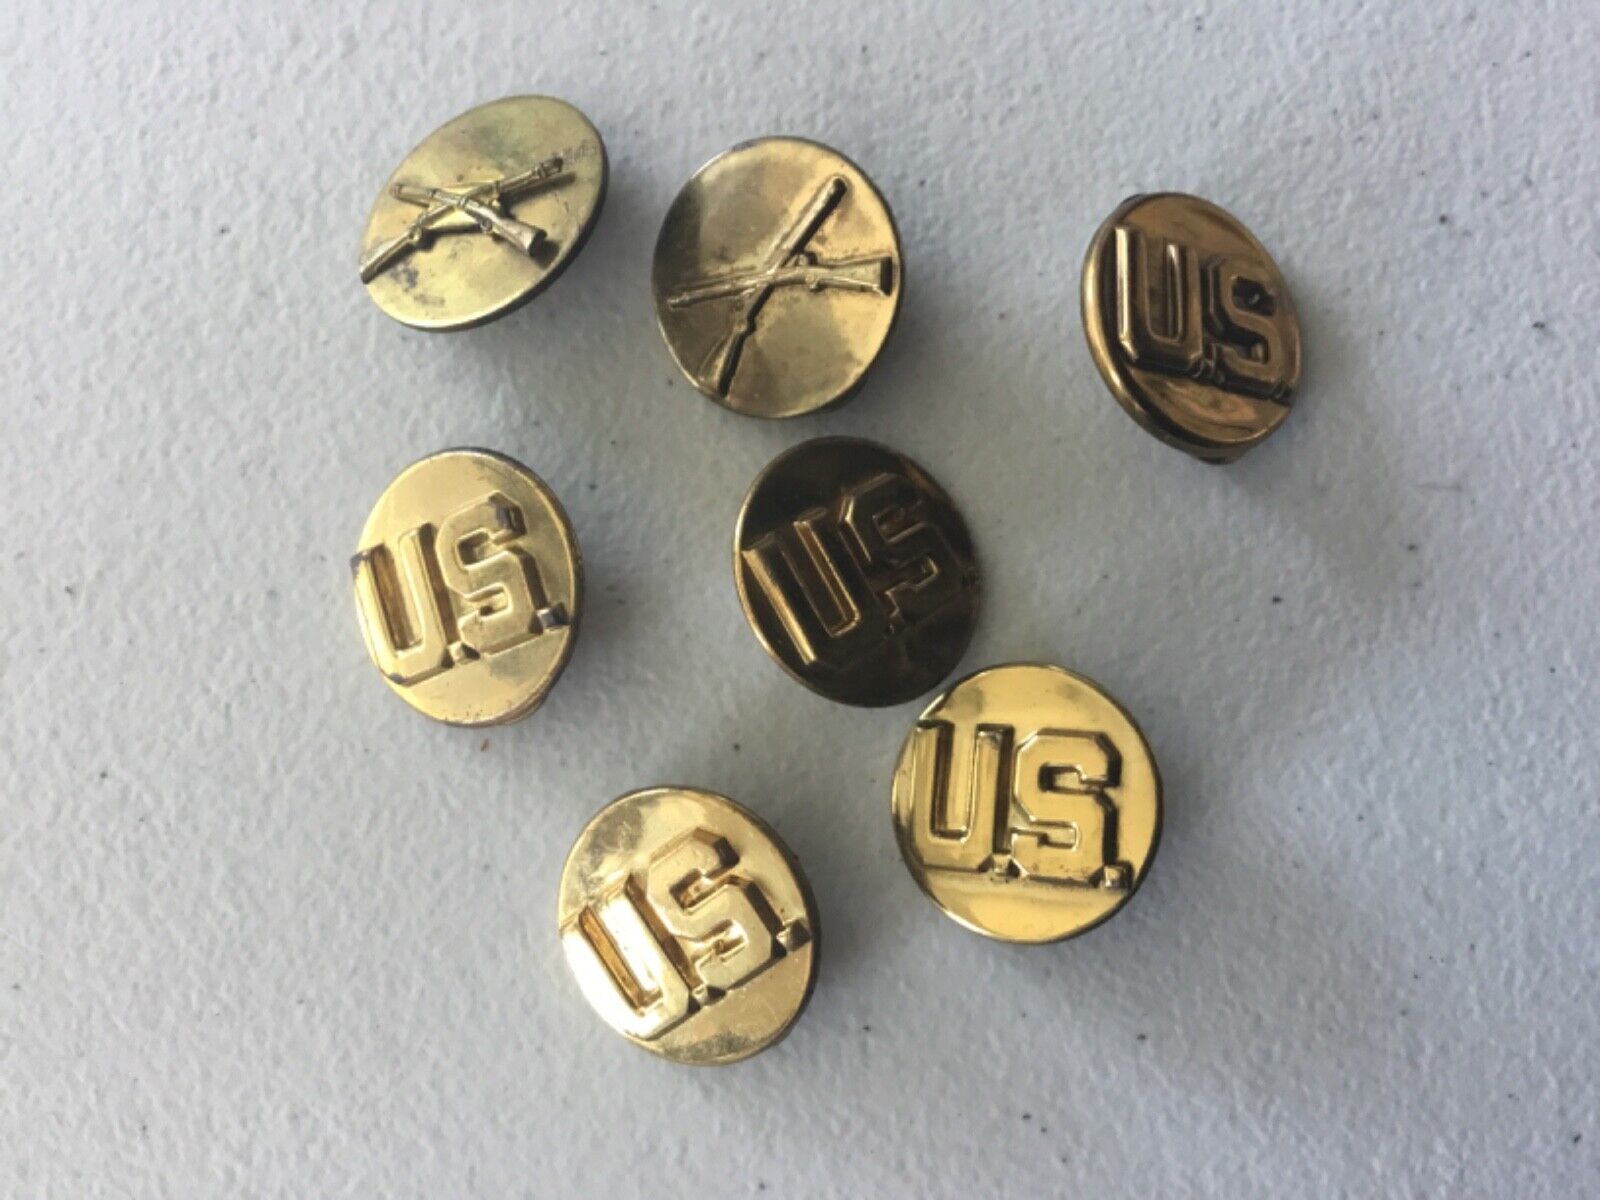 Lot of 7 US Infantry Collar Disc Pins 2 Crossed Rifles 5 US Brass